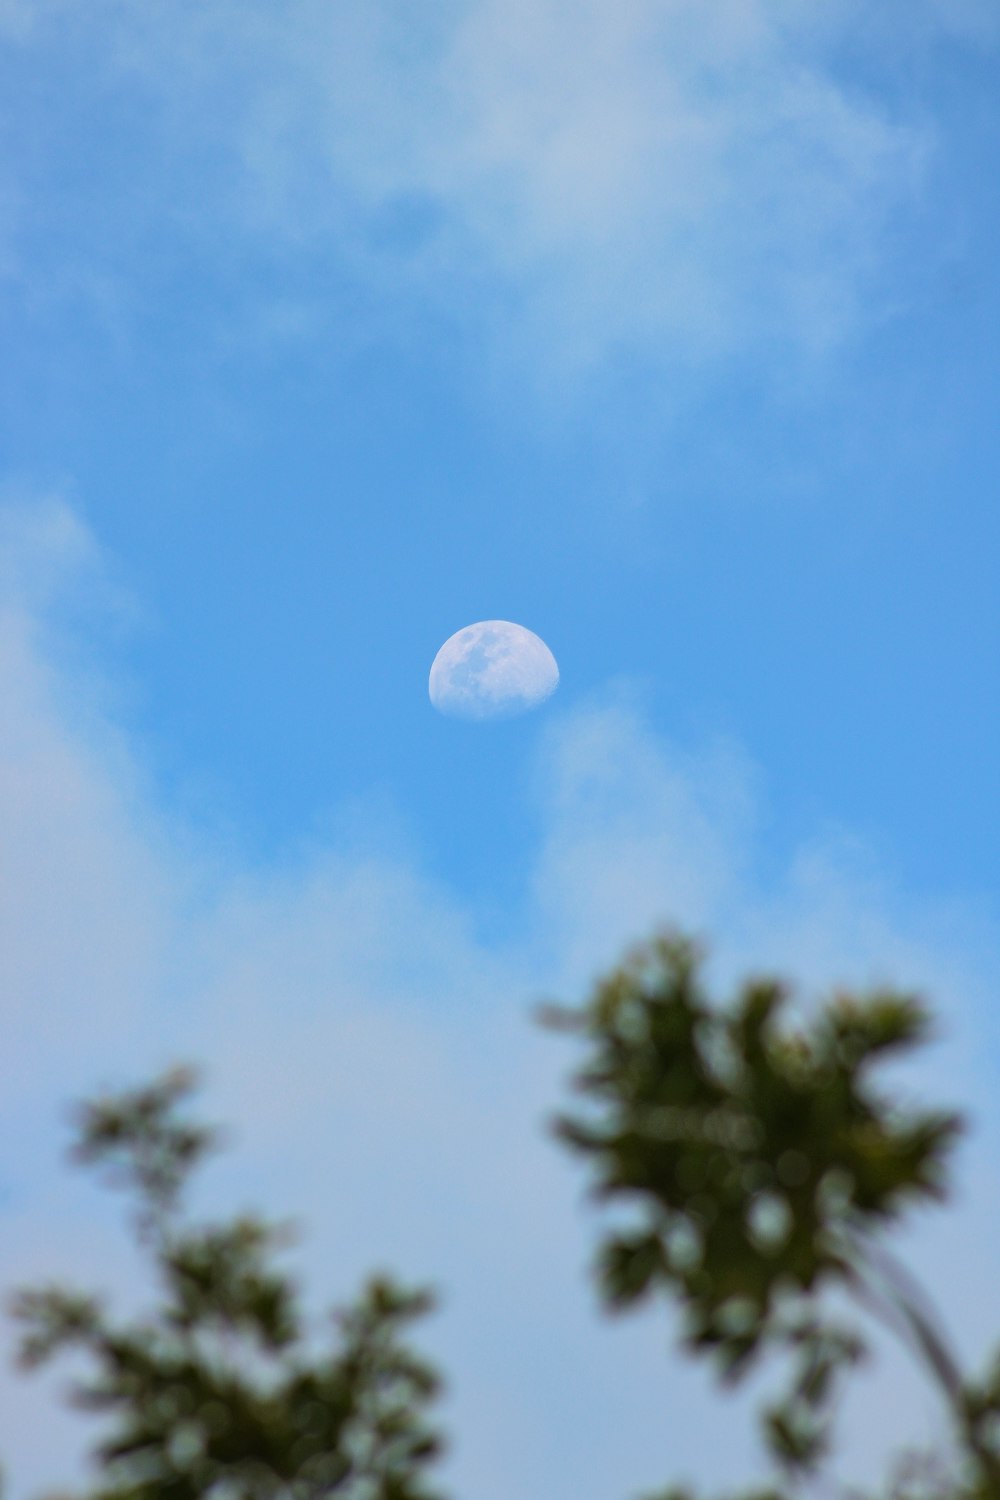 a view of the moon through some trees